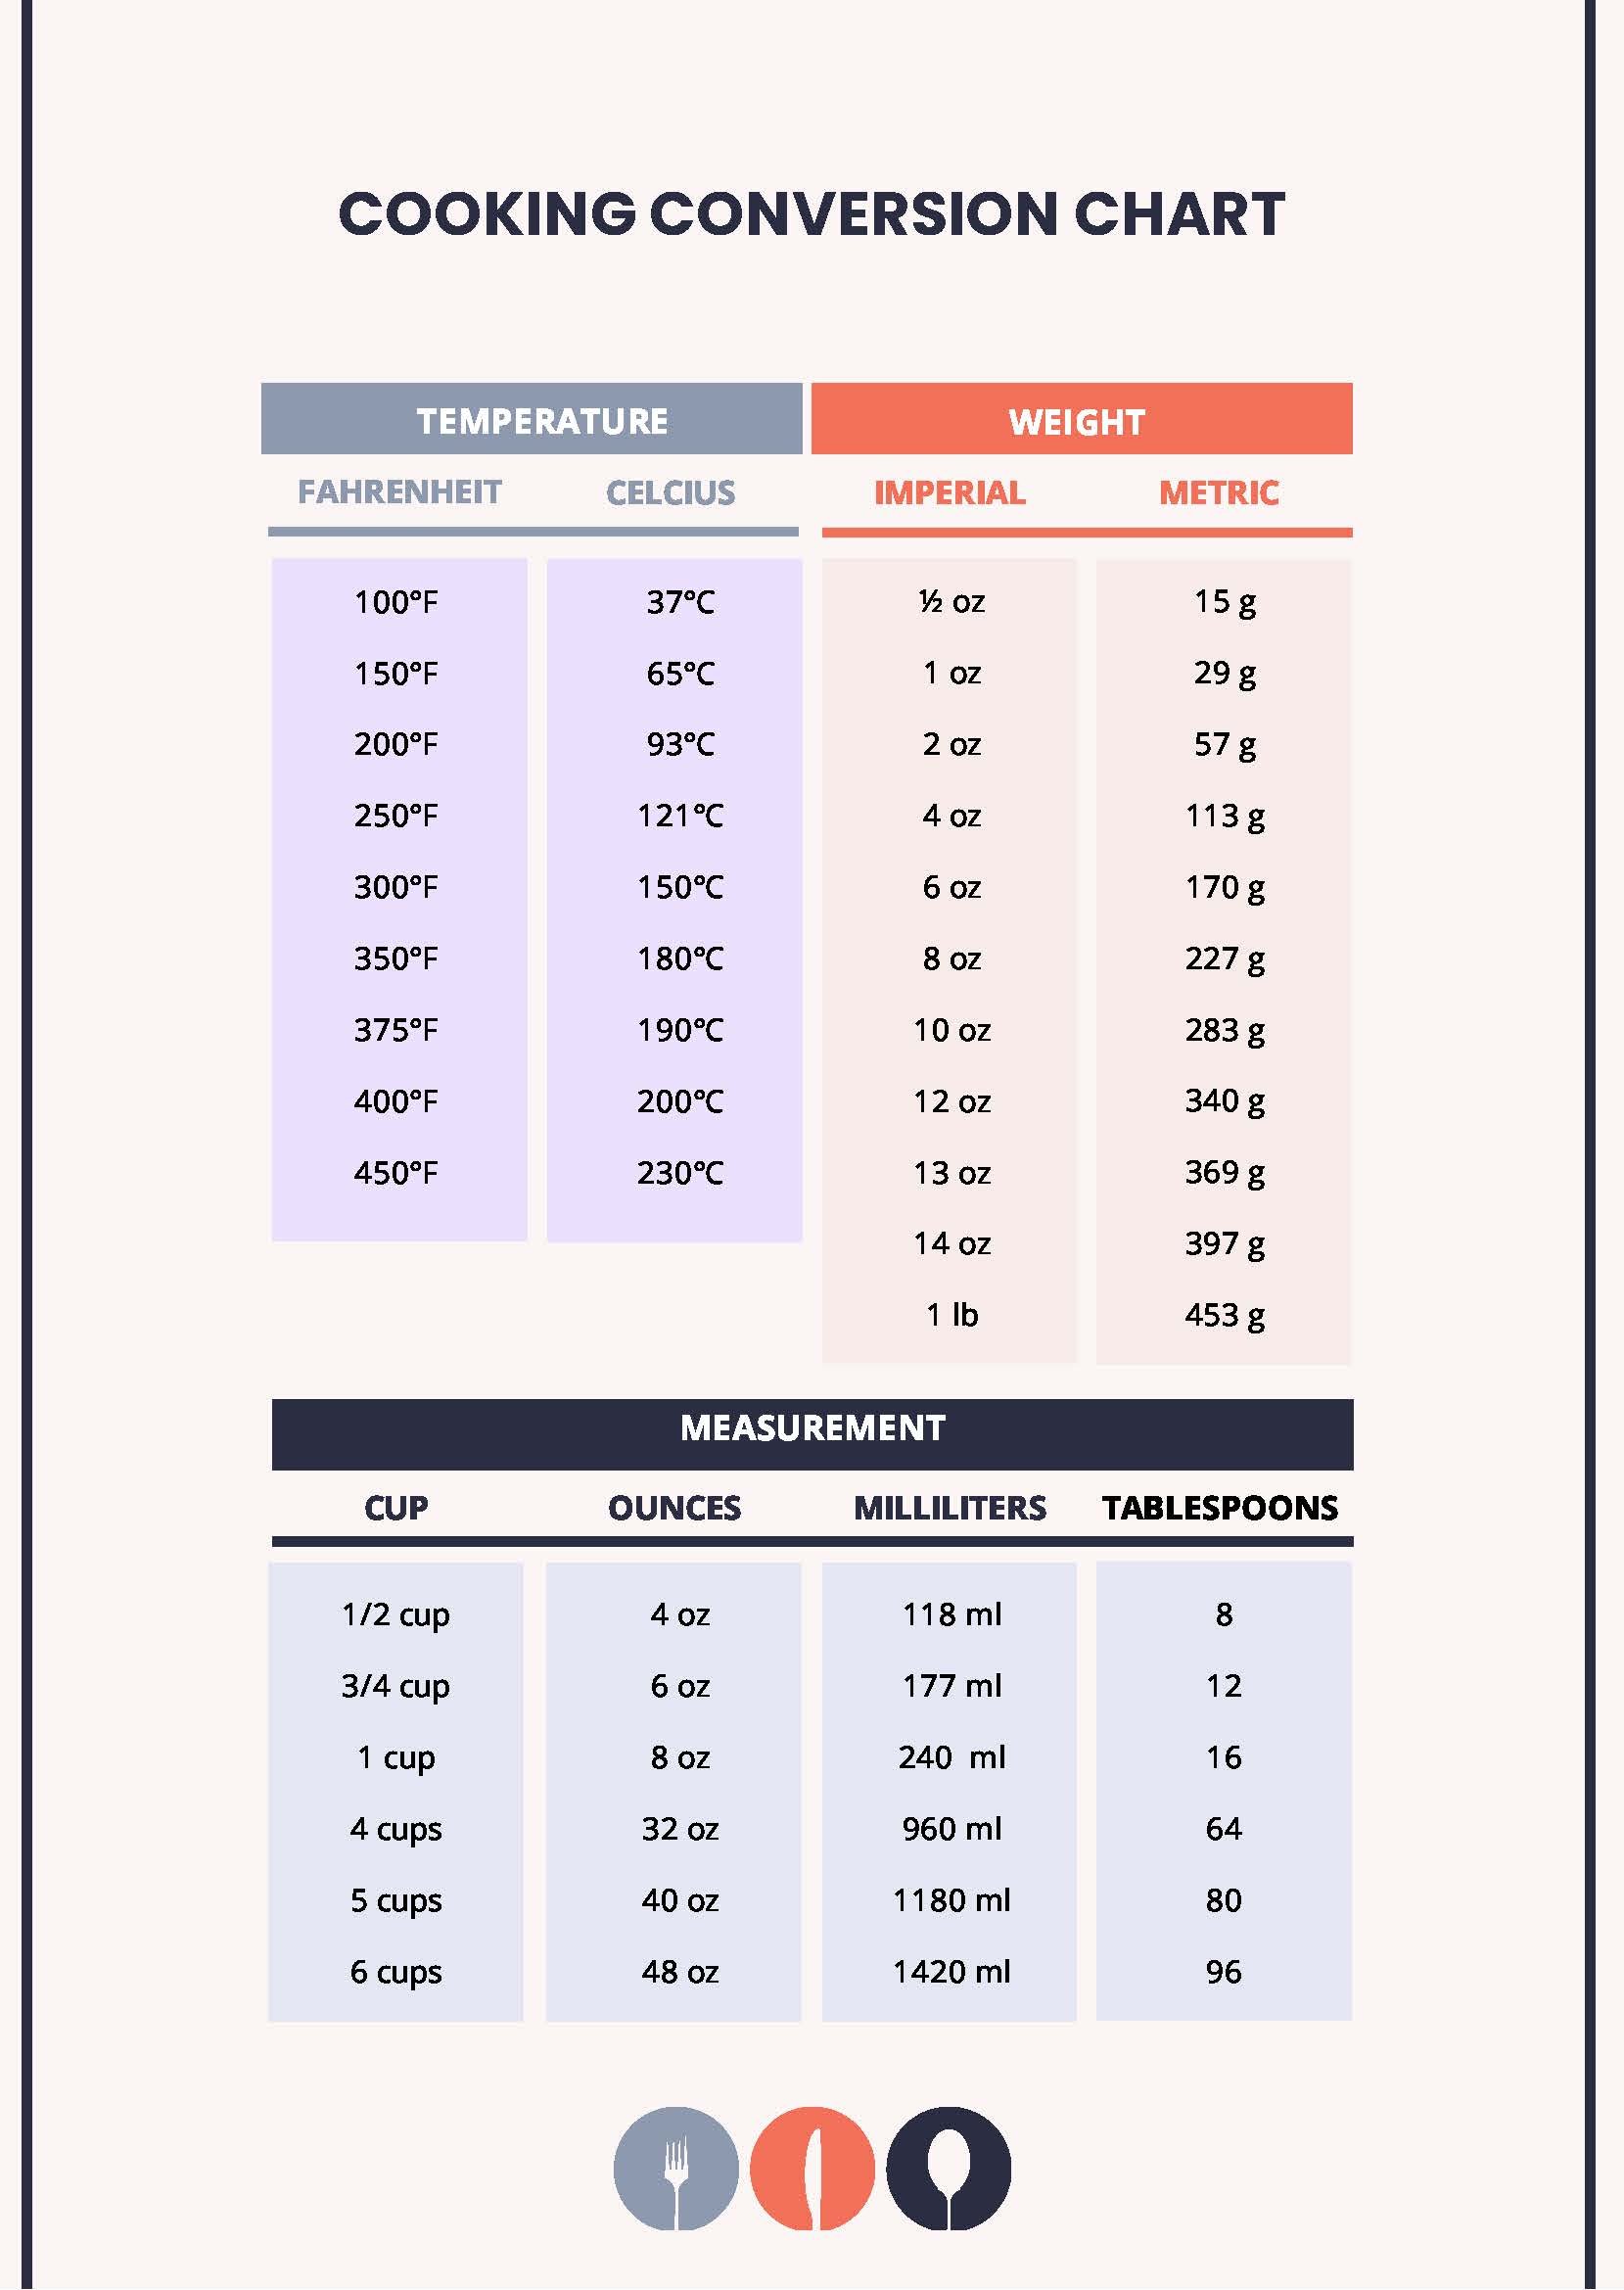 Cooking Conversion Chart in PDF